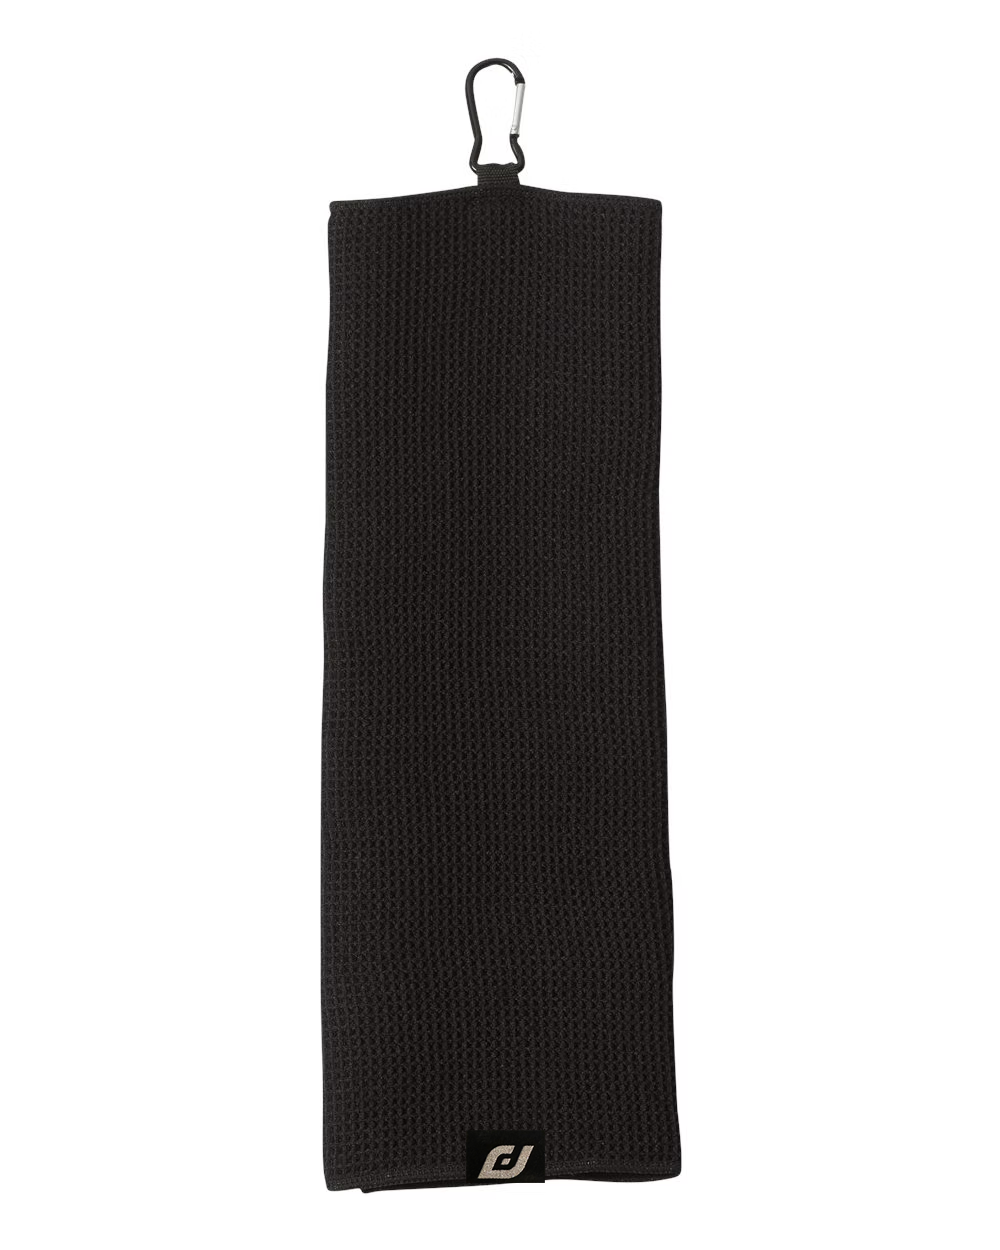 (100) BLACK Large Waffle Golf Towel with Hanging Loop, 1 COLOR IMPRINT